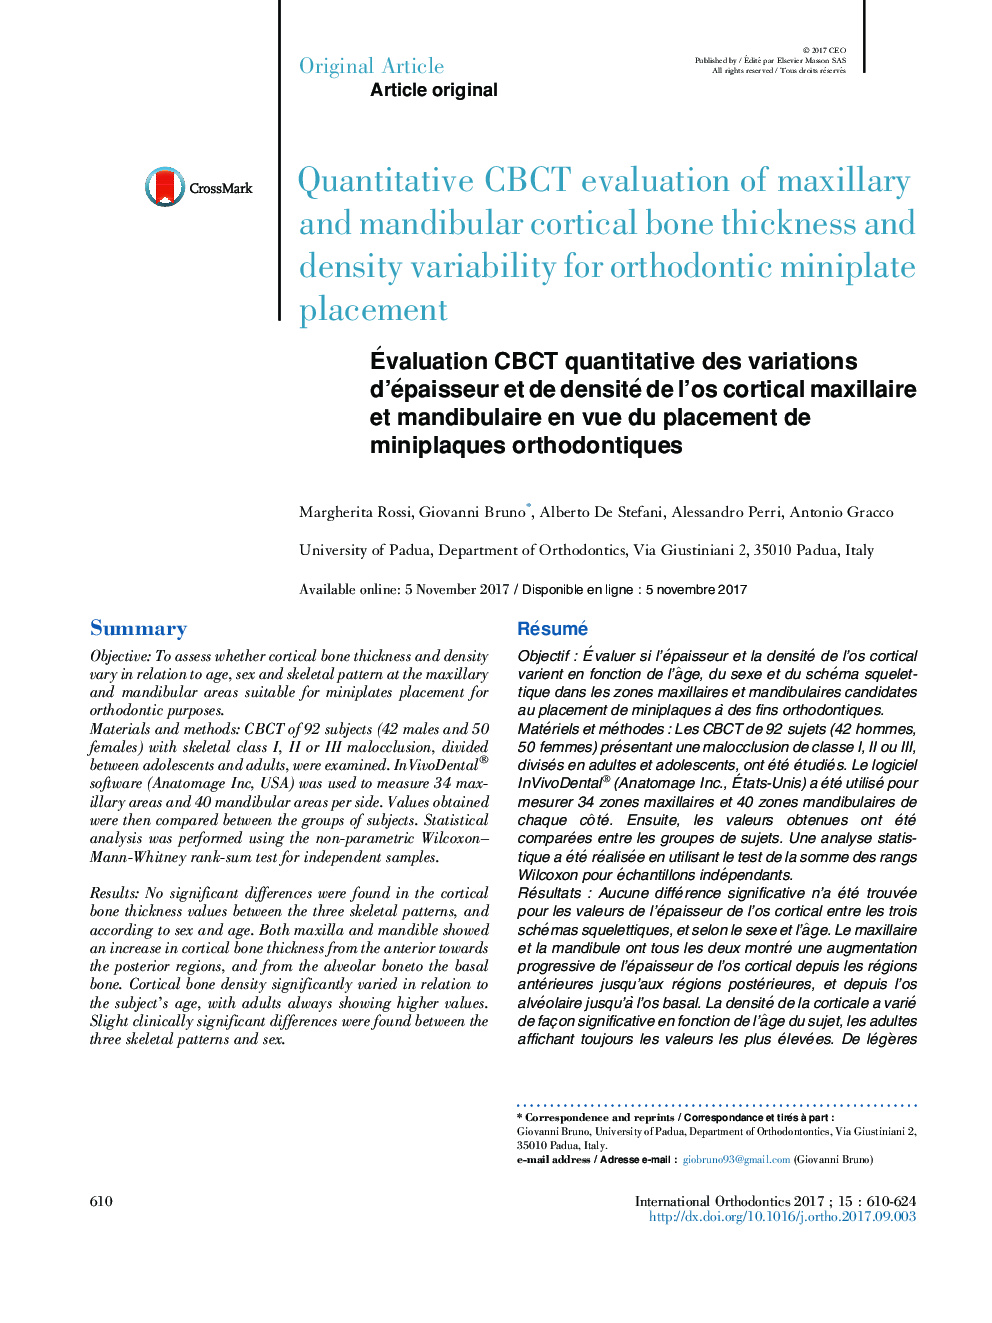 Quantitative CBCT evaluation of maxillary and mandibular cortical bone thickness and density variability for orthodontic miniplate placement